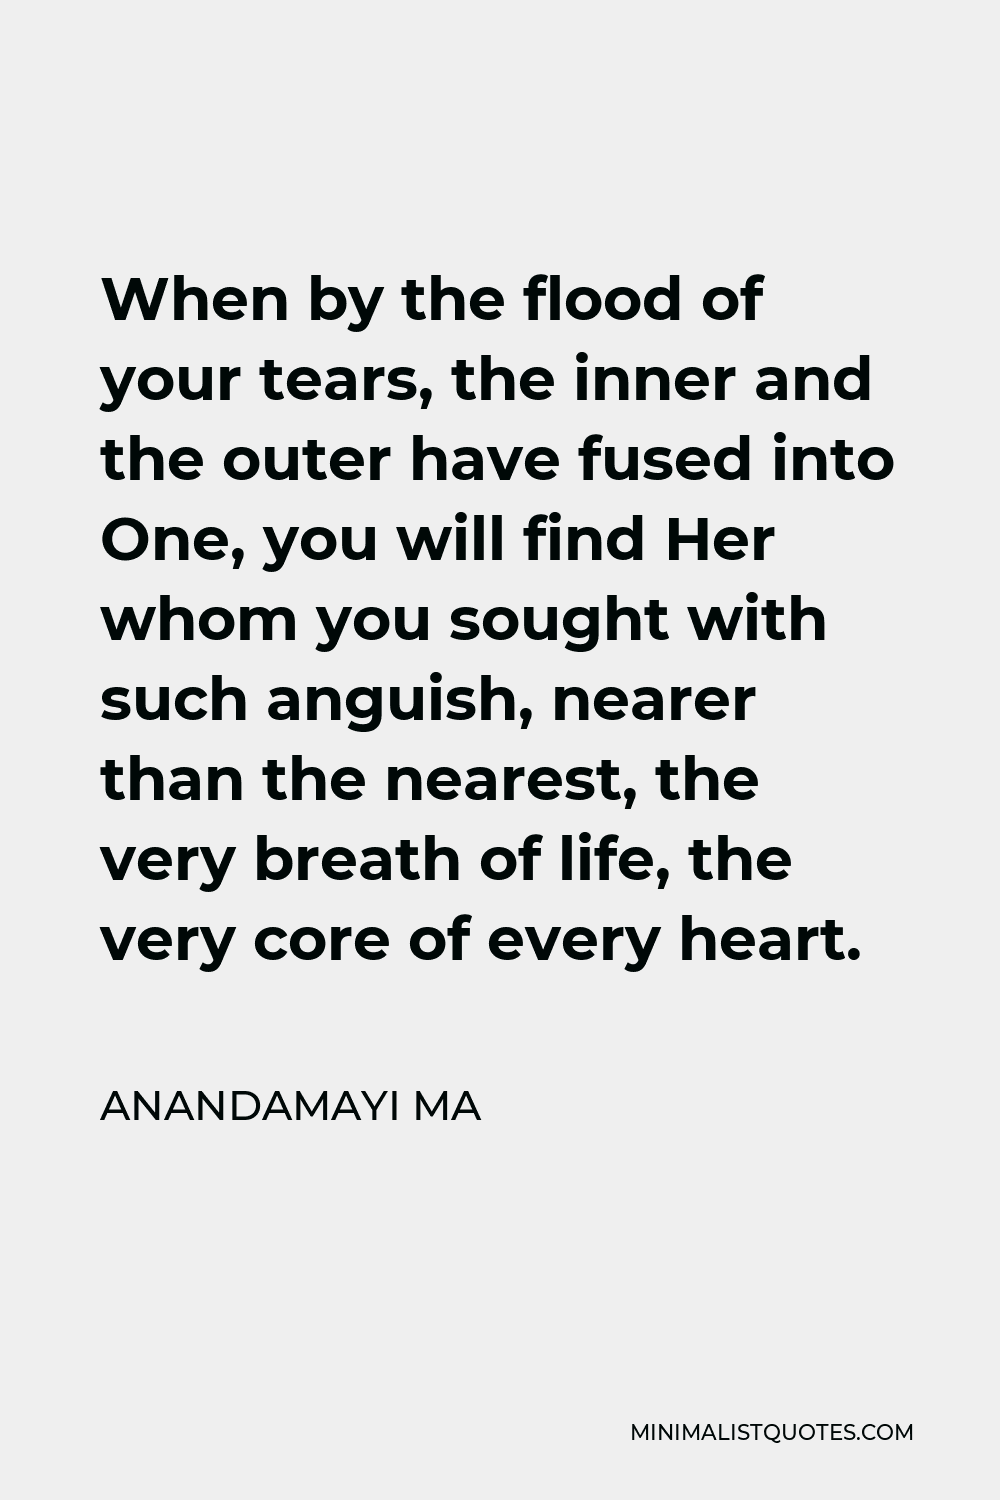 Anandamayi Ma Quote - When by the flood of your tears, the inner and the outer have fused into One, you will find Her whom you sought with such anguish, nearer than the nearest, the very breath of life, the very core of every heart.